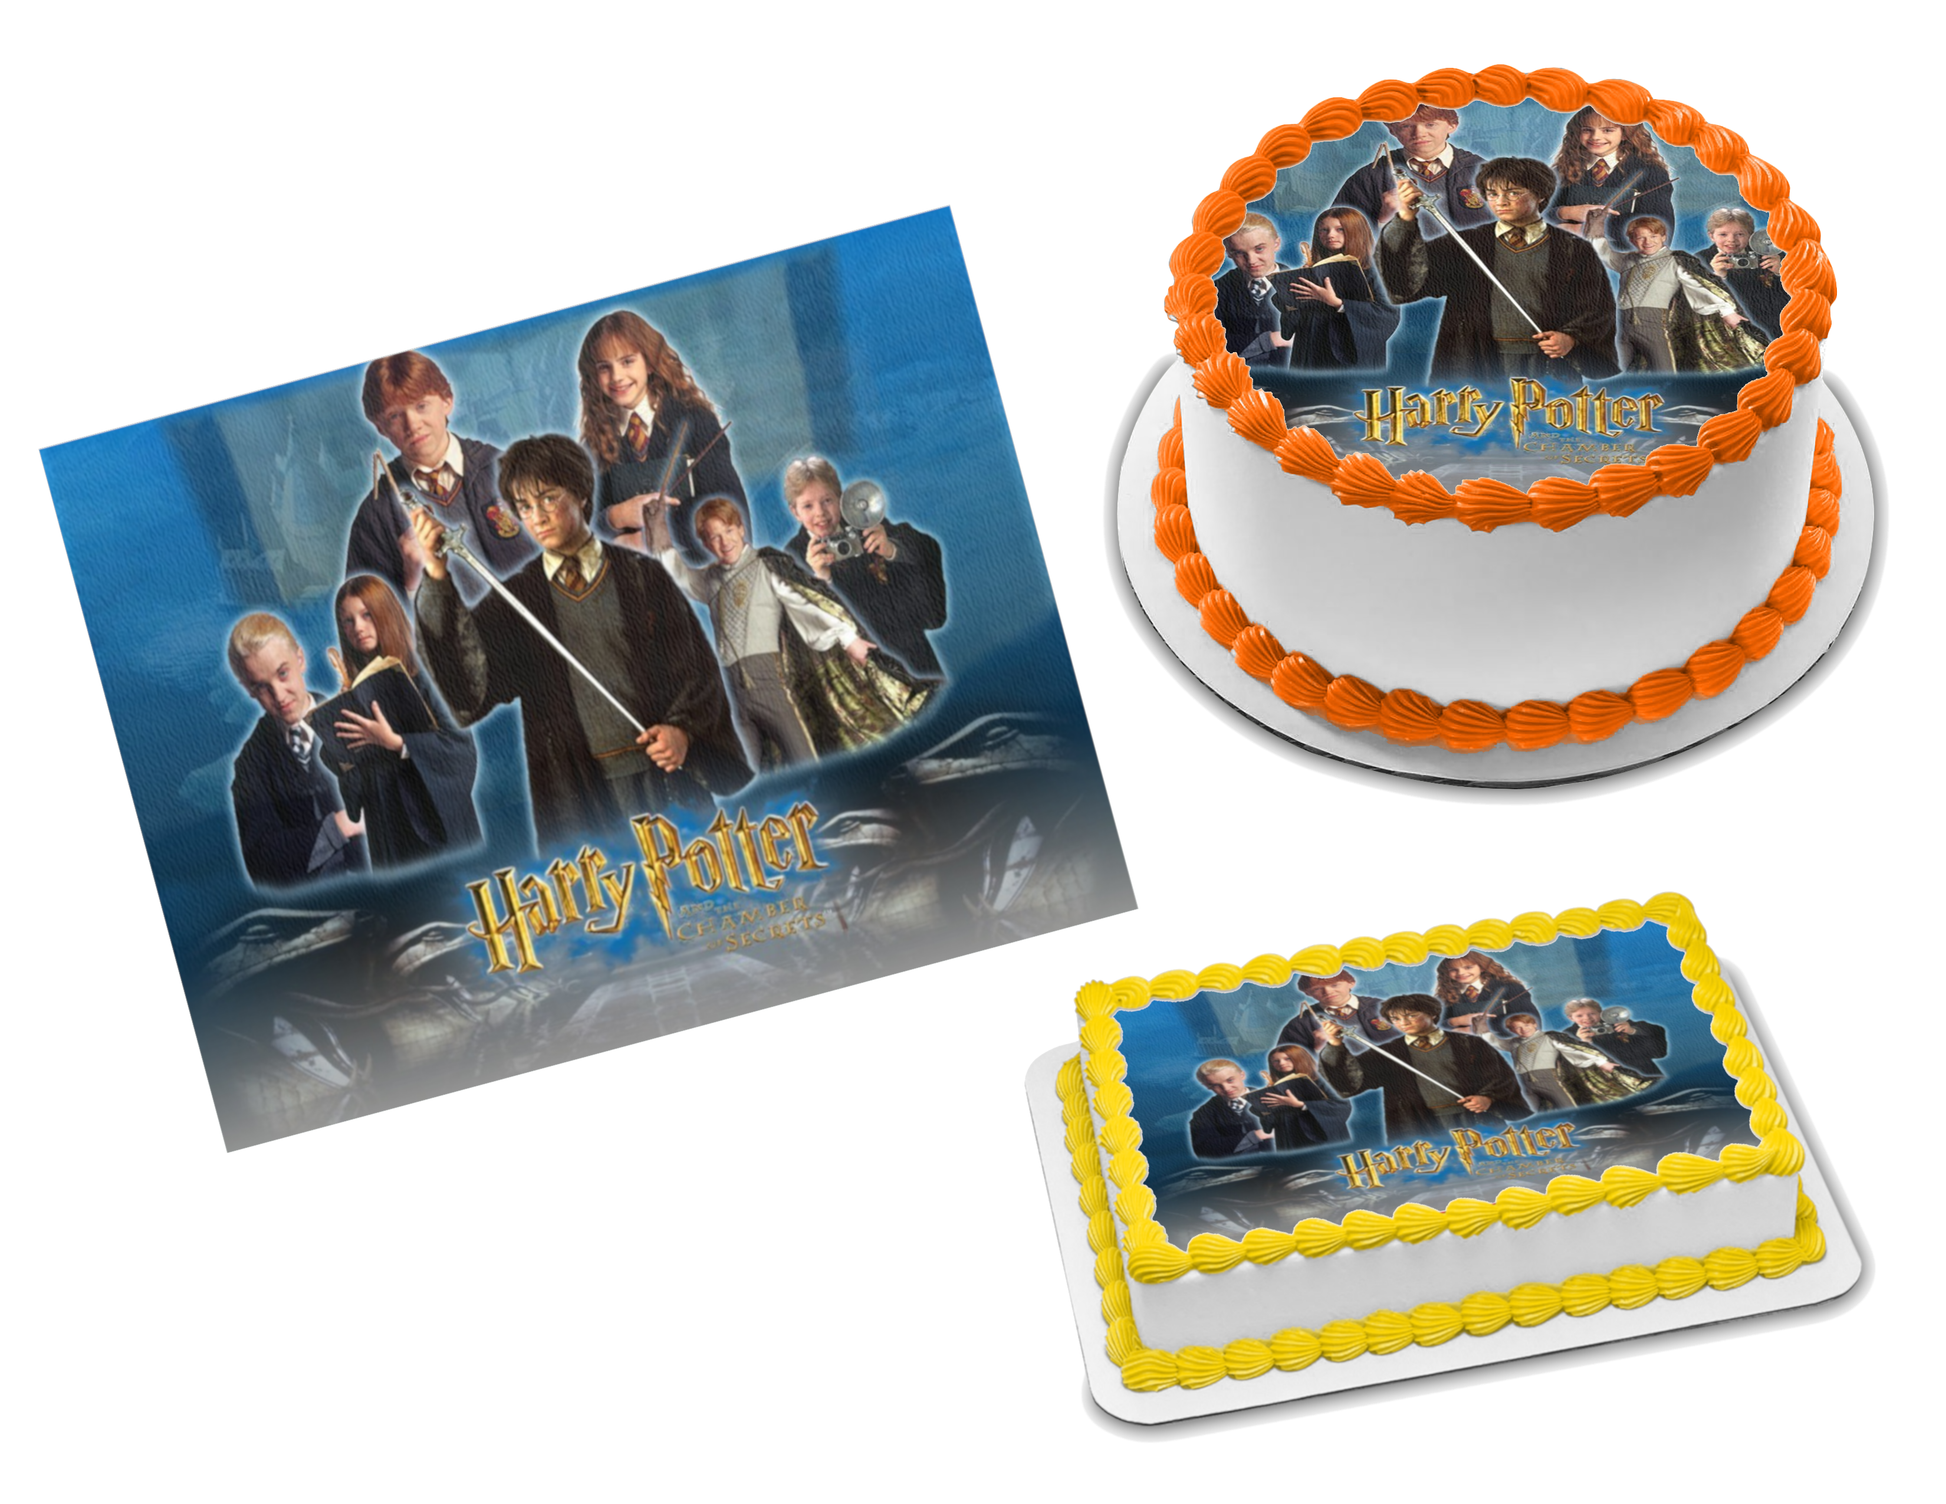 Whip Up This DIY Harry Potter Cake Ornament for Christmas